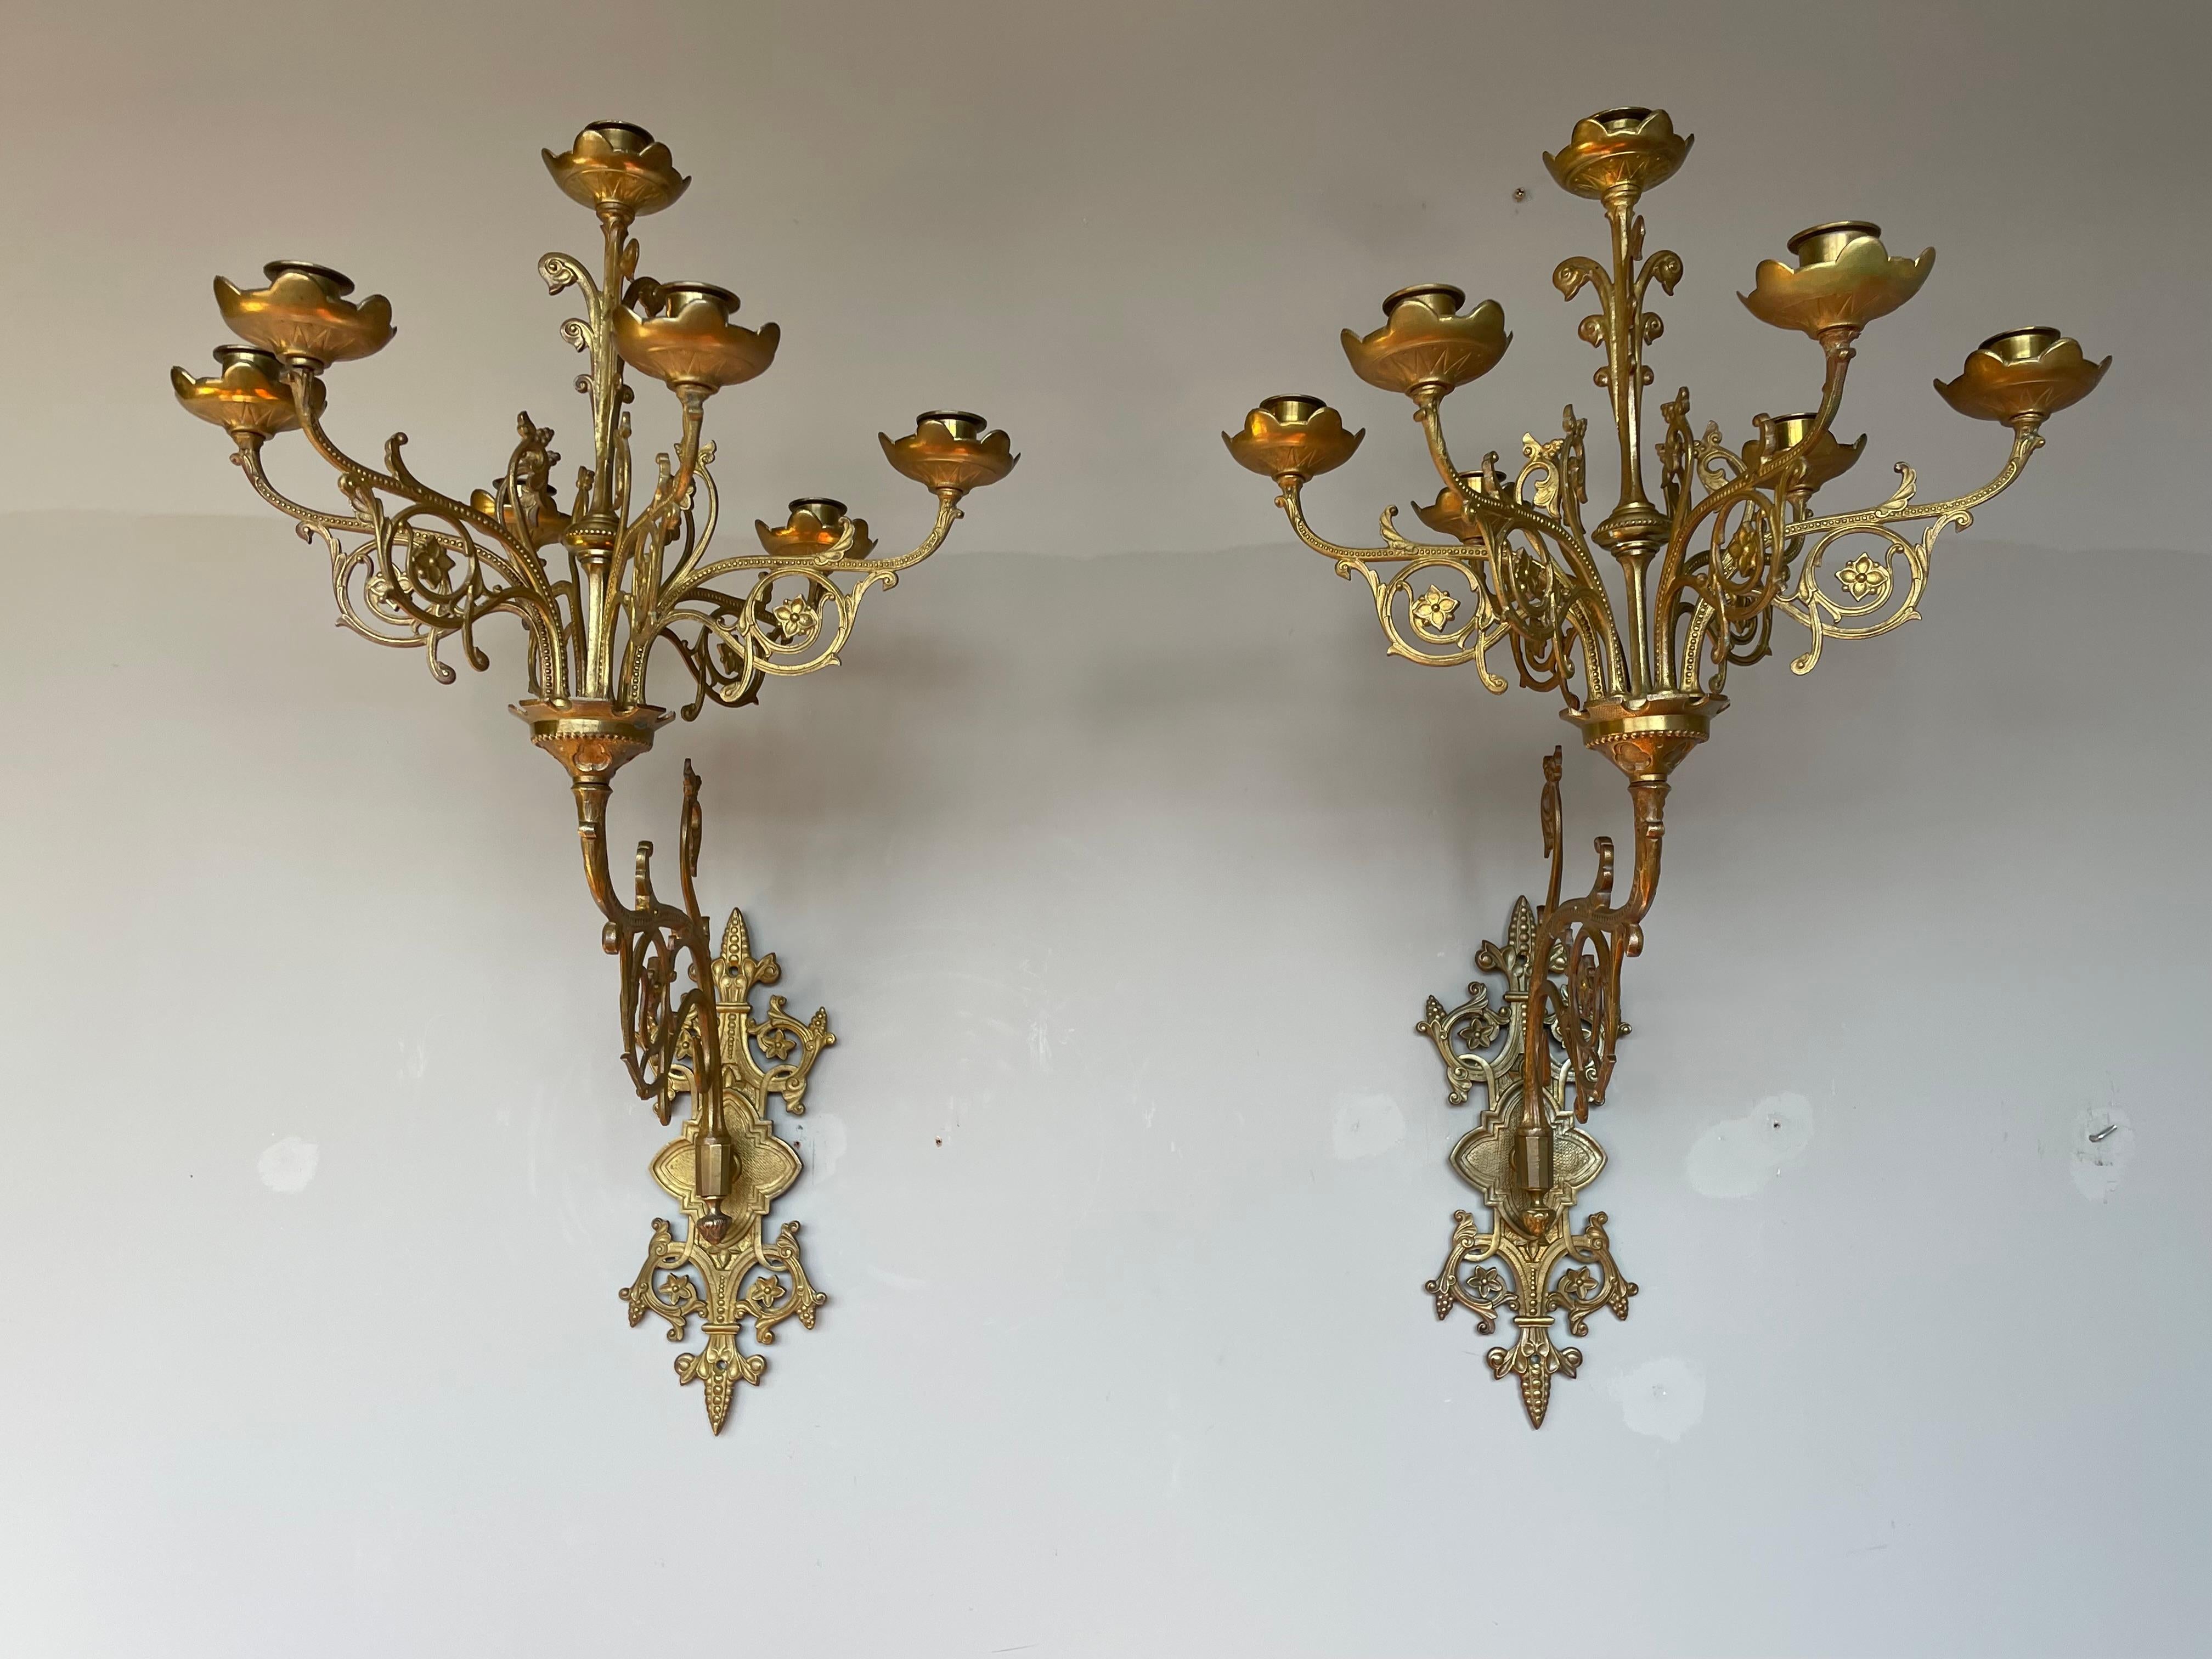 Large Pair of Gothic Revival Gilt Bronze Church Wall Candelabras Candle Sconces For Sale 3